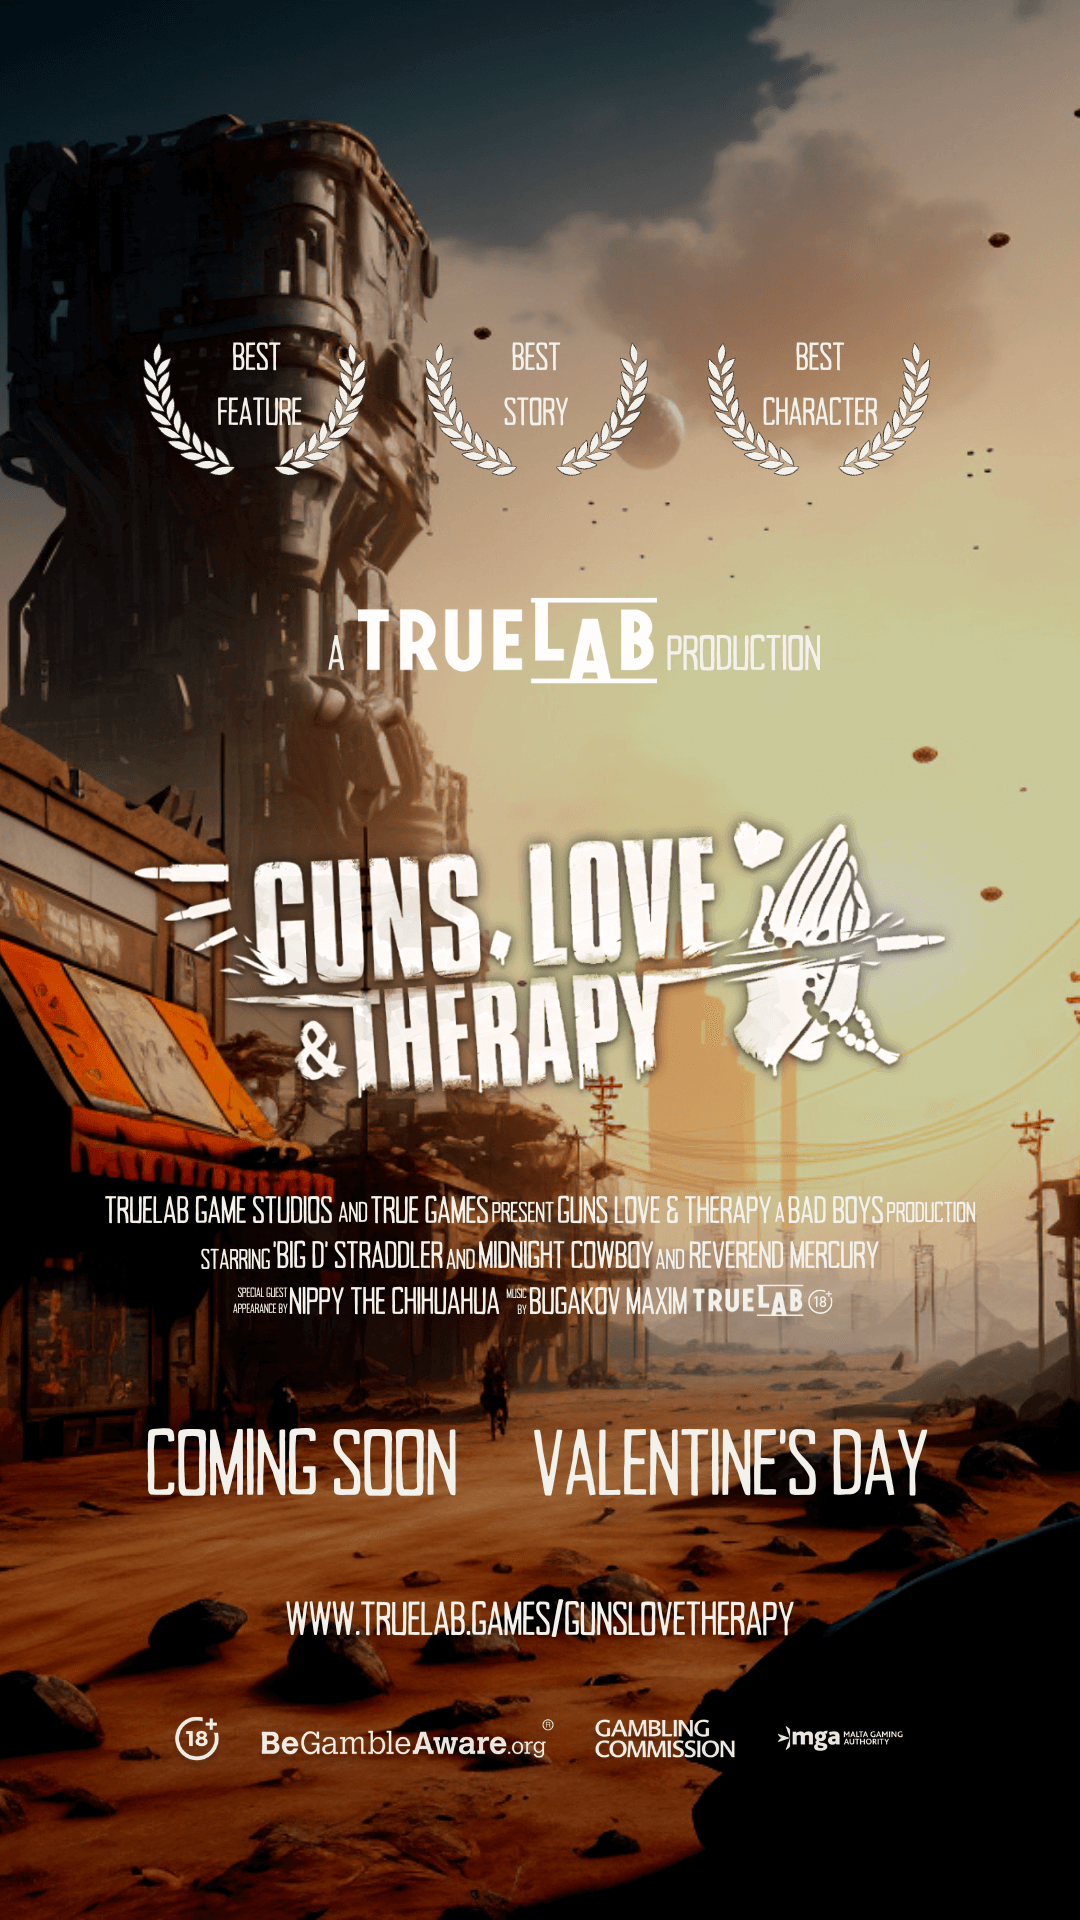 Movie-like poster of 'Guns, love and therapy' game